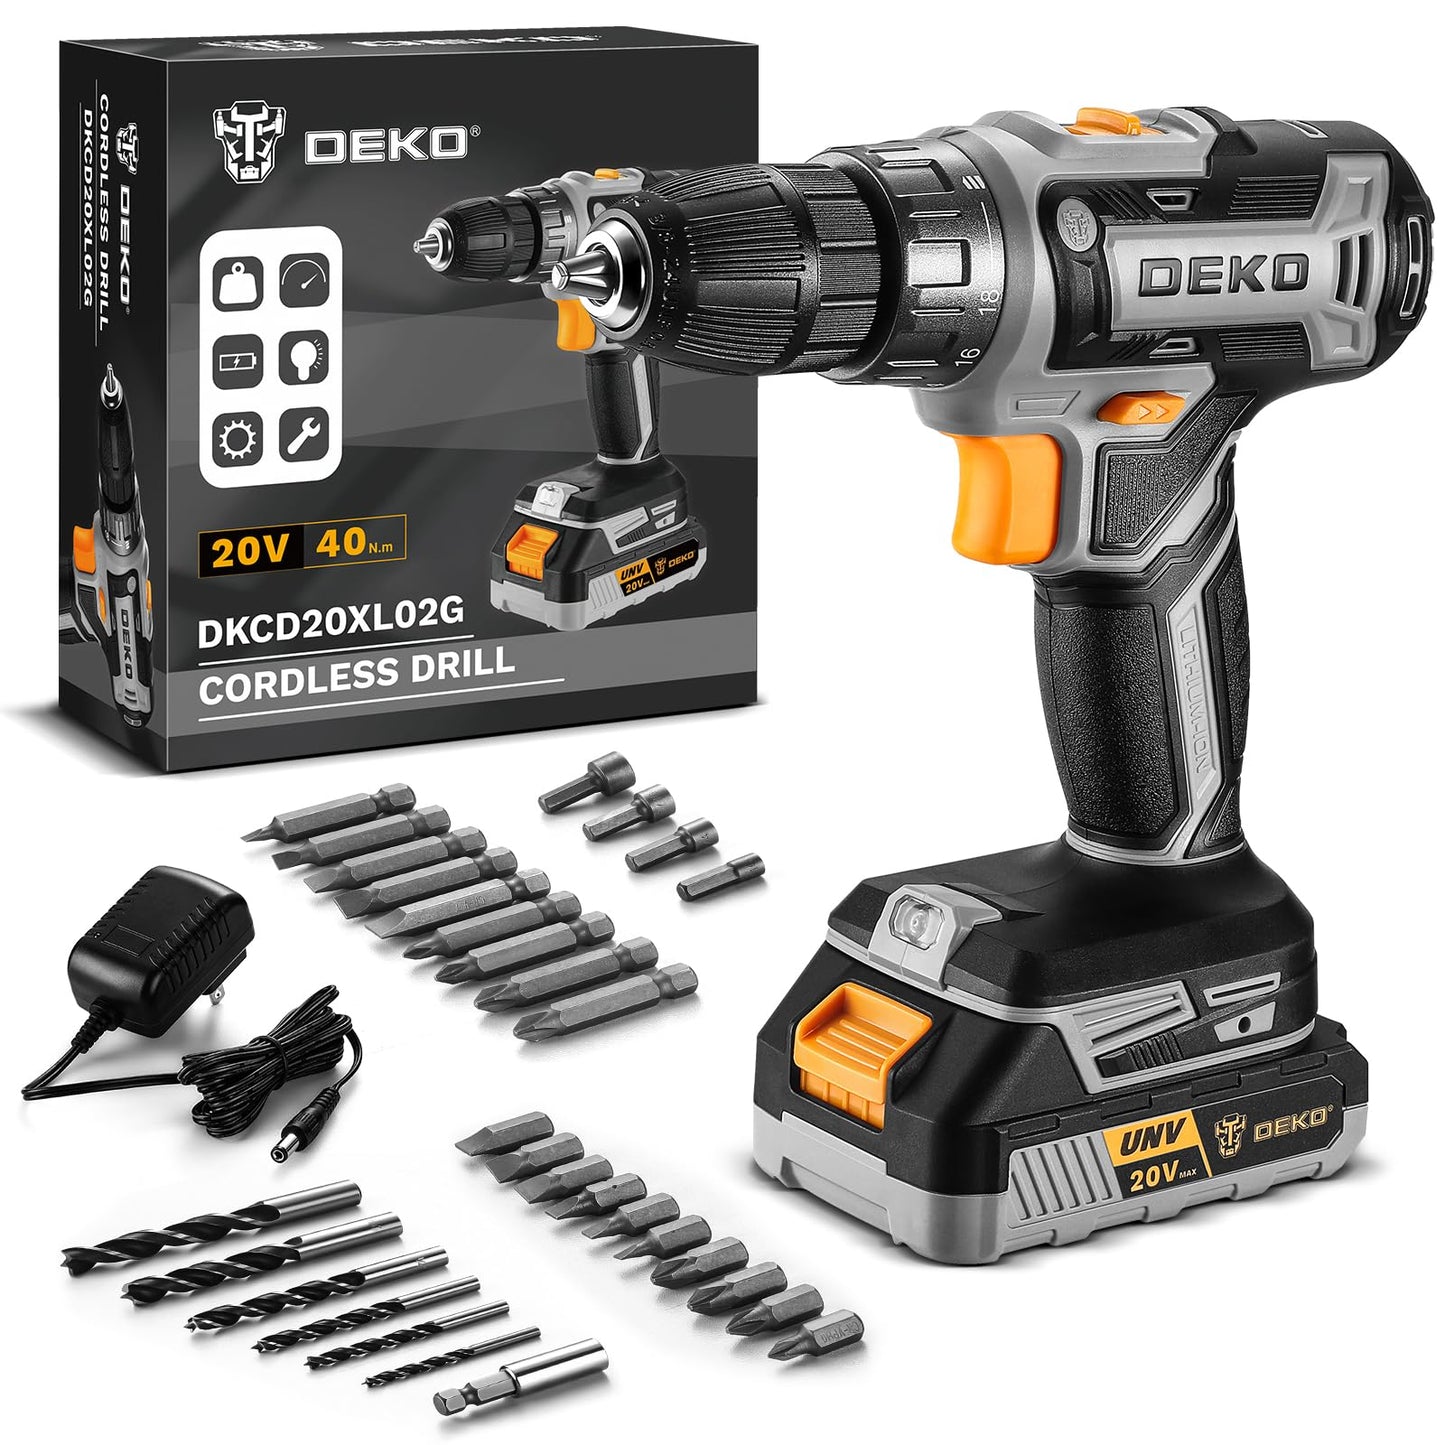 DEKO PRO Cordless Drill 20V Electric Power Drill Set Tool Drills Cordless Set with Battery and Charger 20 Volt Drill Driver Kit